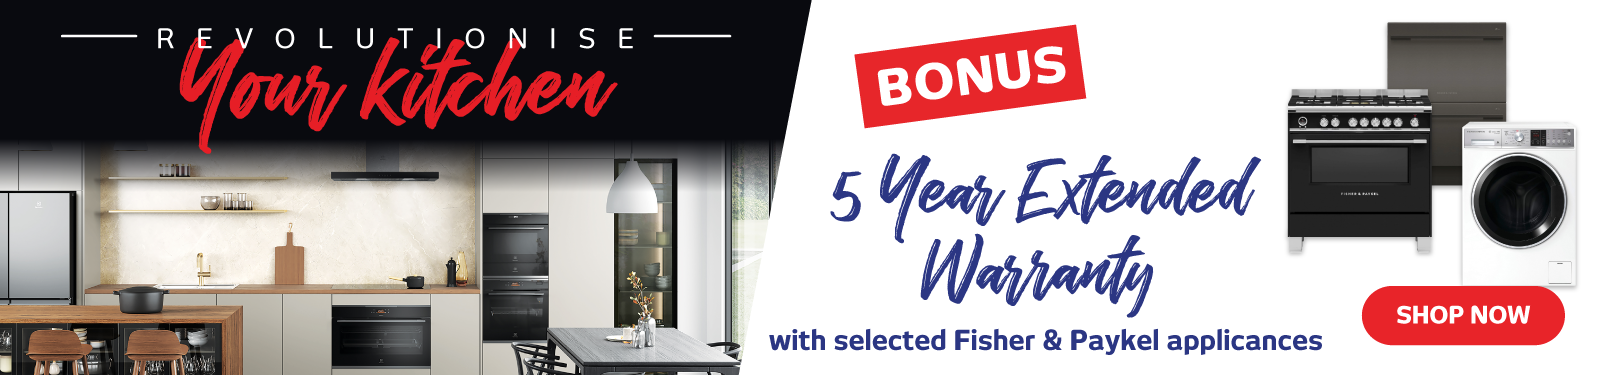 Premium Kitchen Catalogue - Bonus Extended 5 Year Warranty on Selected Products